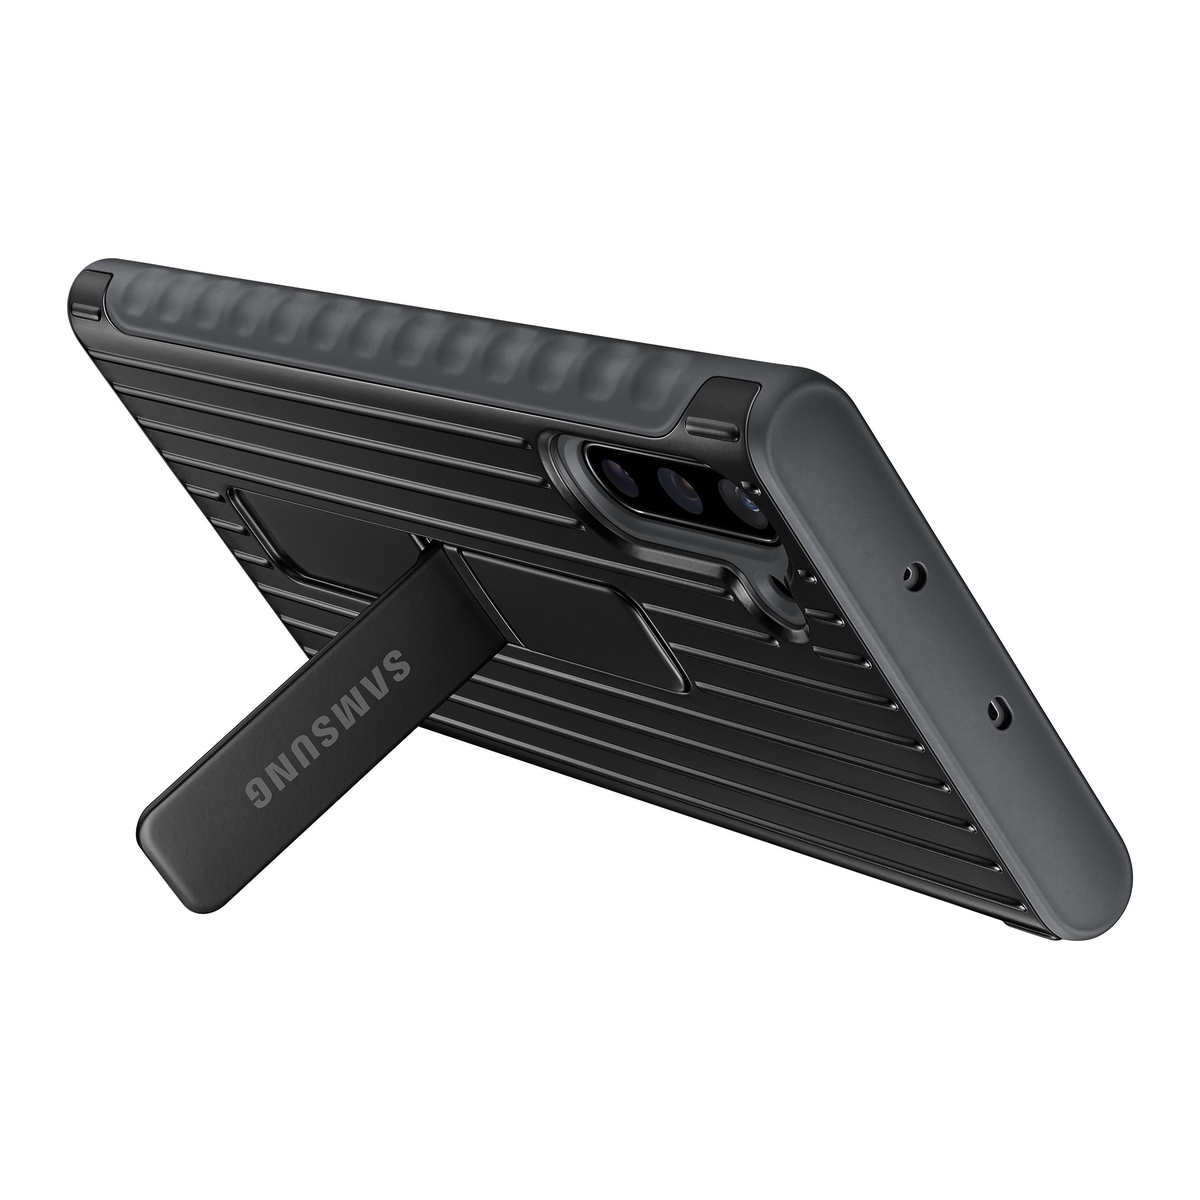 Samsung Galaxy Note10 Protective Standing Cover RN970 Black